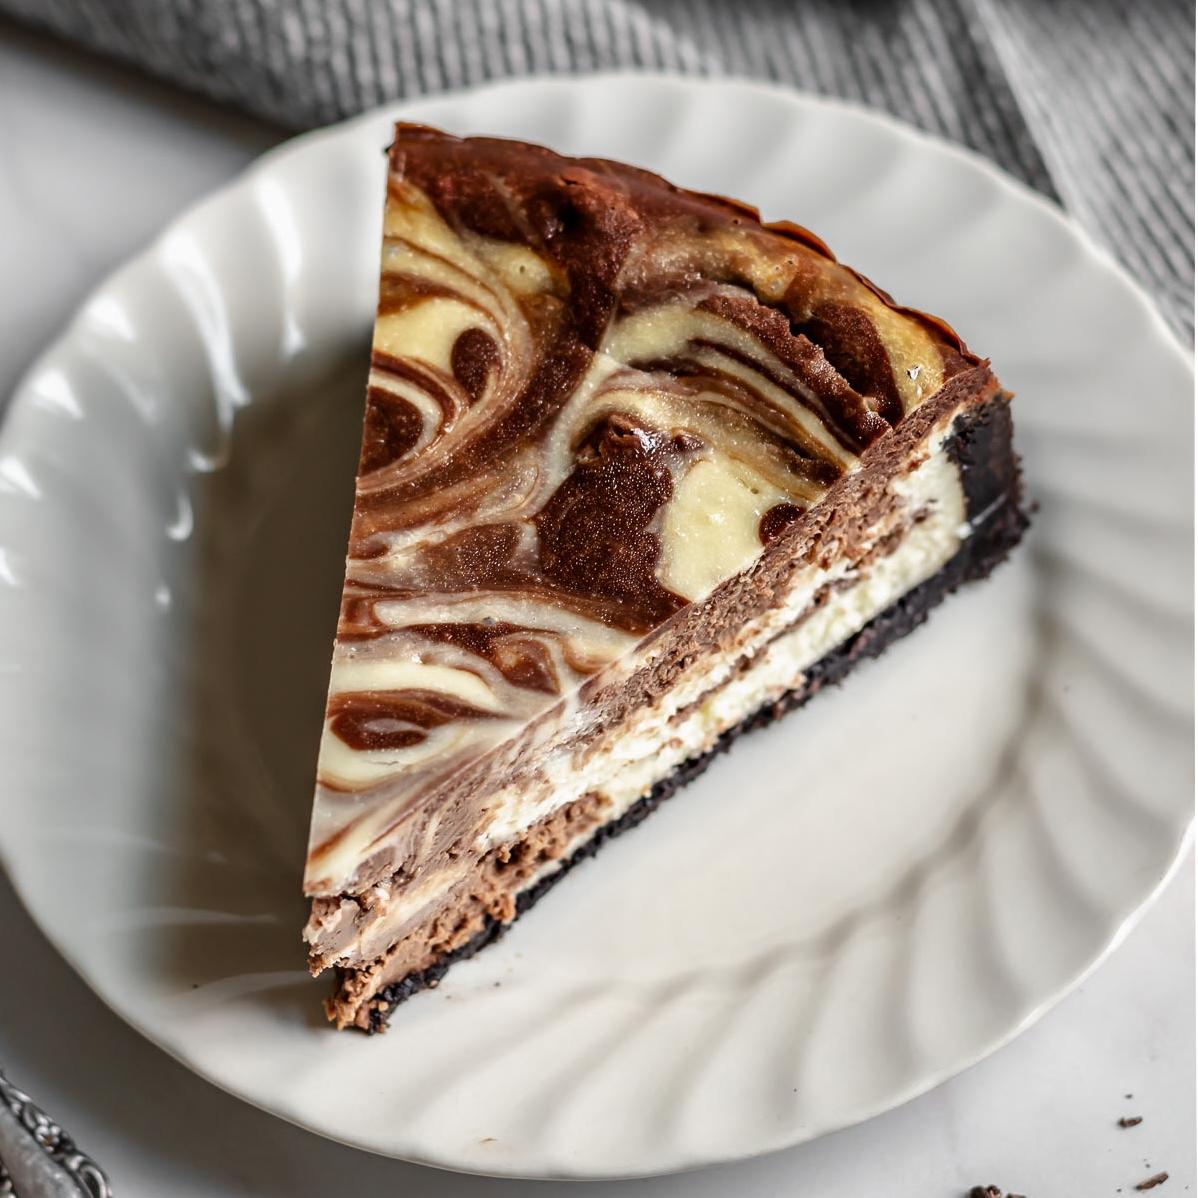  Life is short, eat dessert first with our Mocha Swirl Cheesecake